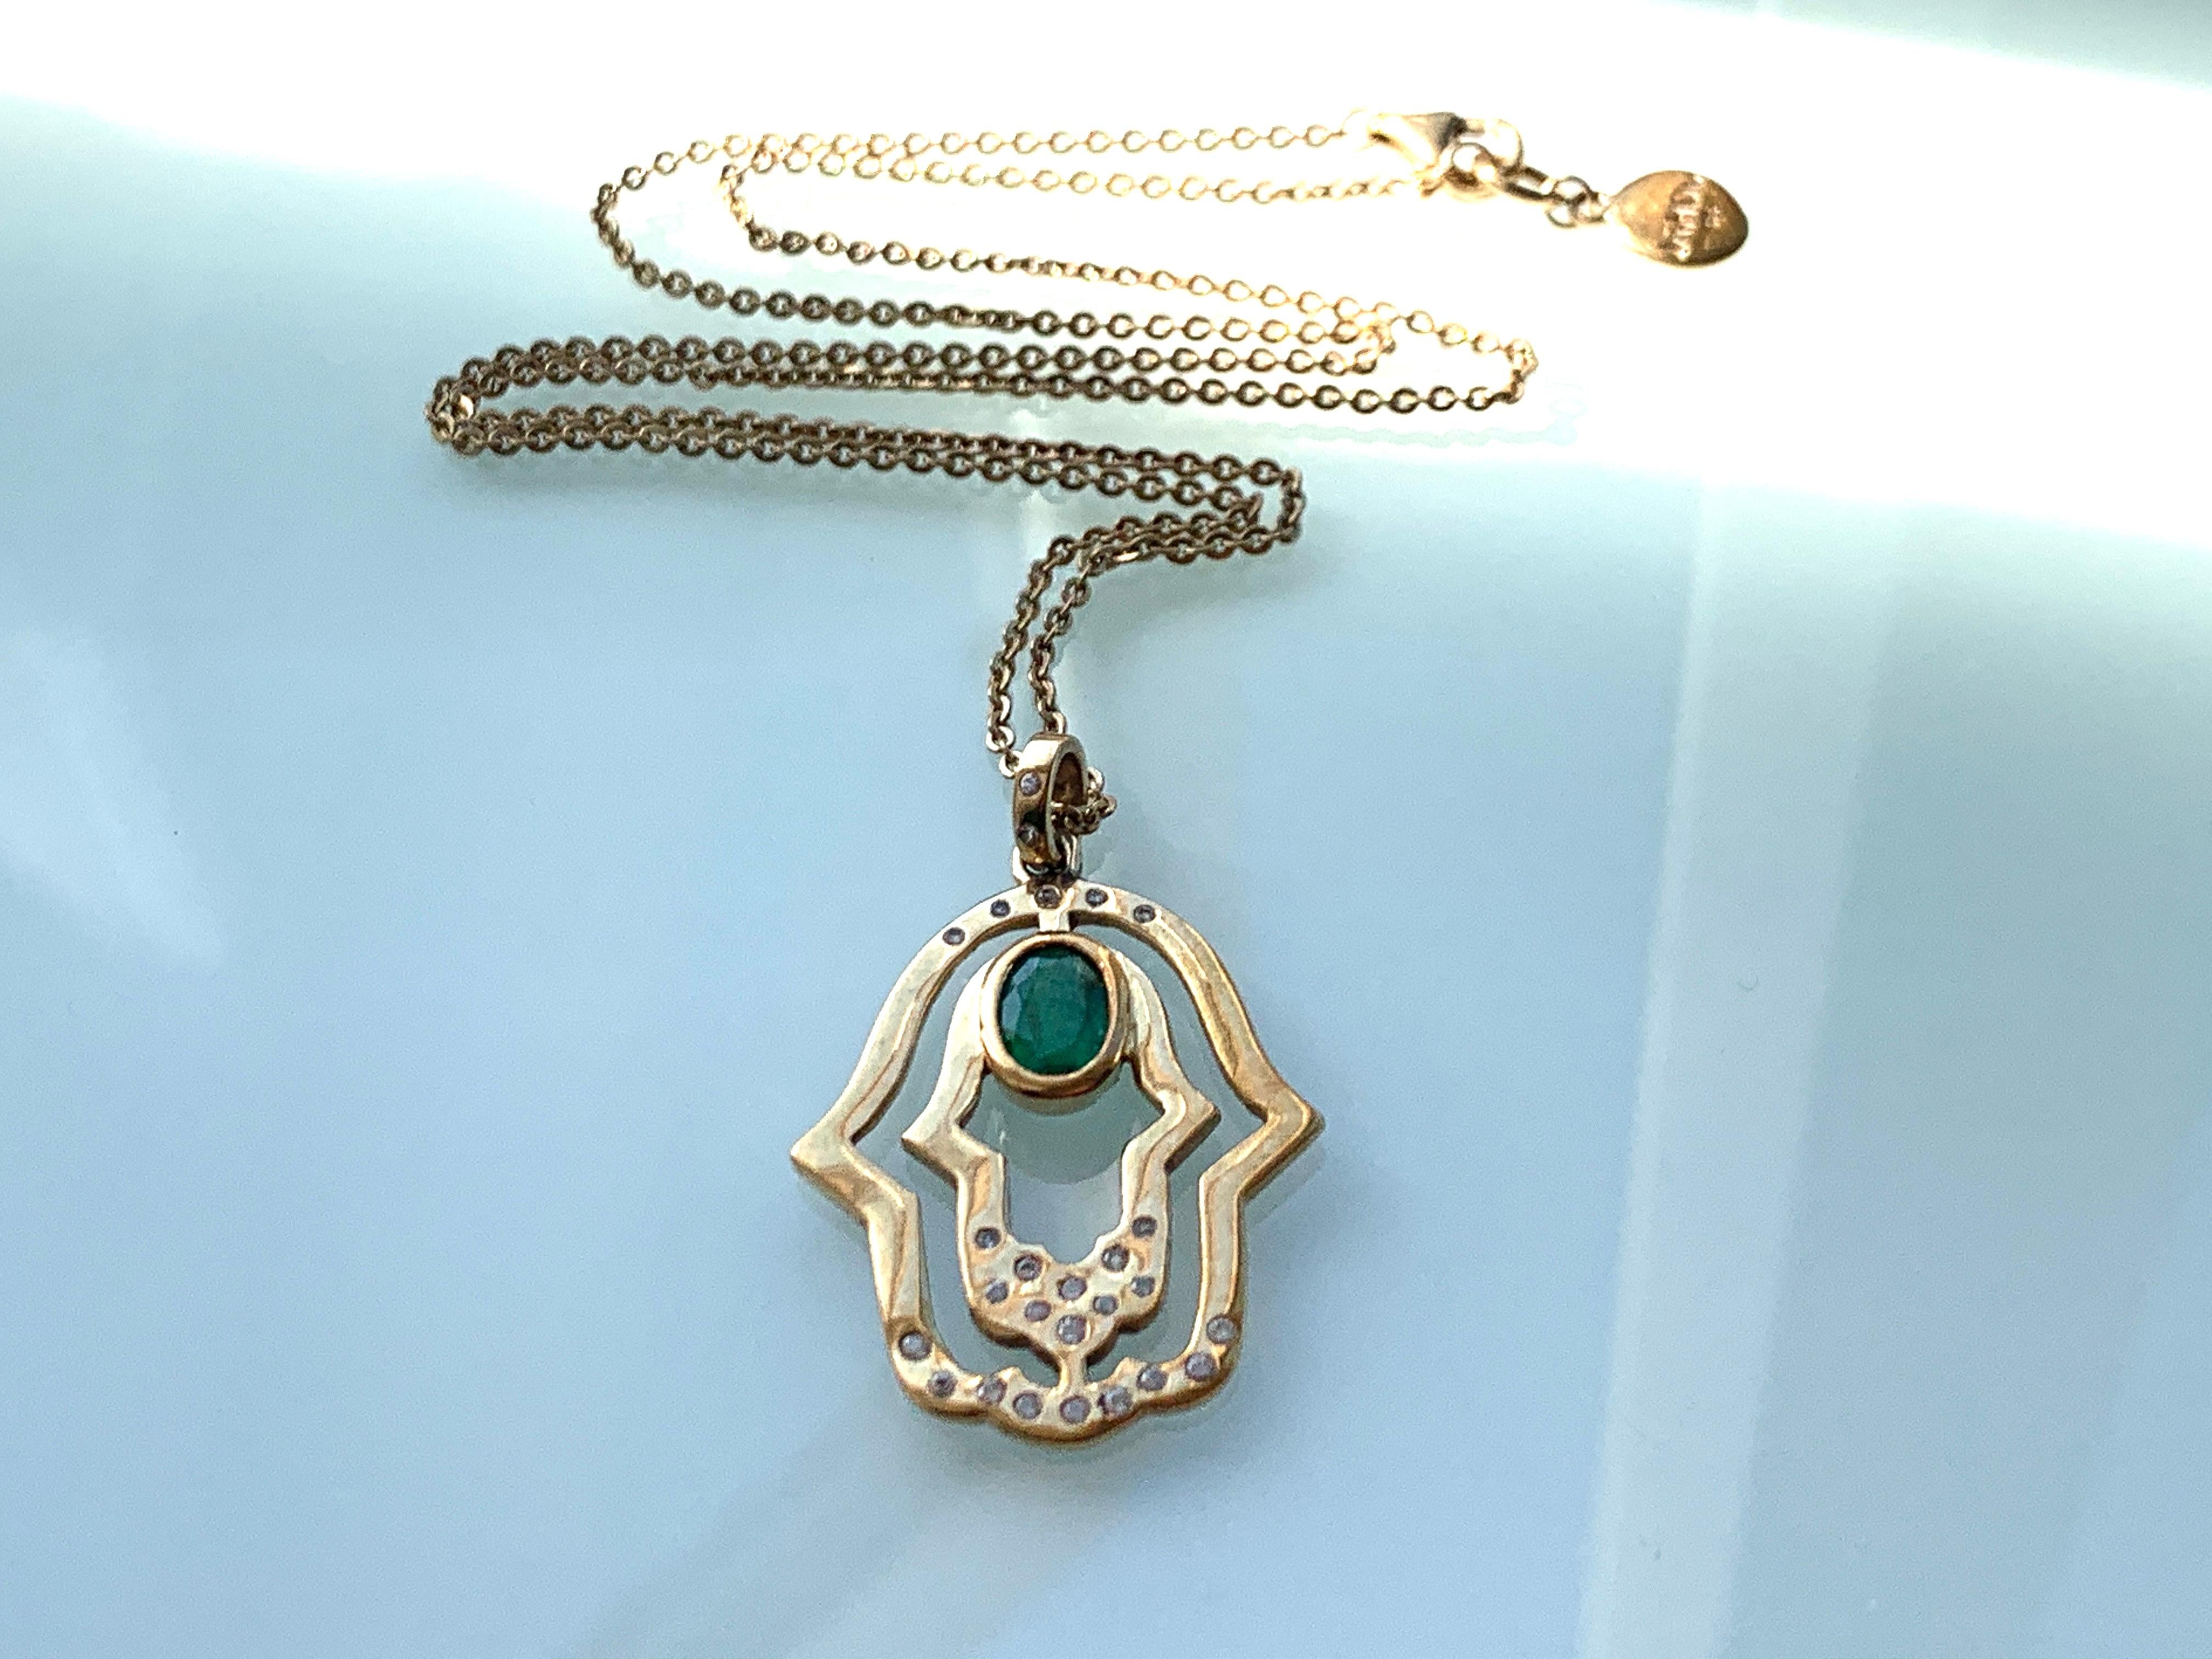 Beautiful 9ct Gold Necklace 
by designer Von Johanna Joop for JAHDO 
distributed by Rocks & Co.
Consists of :
0.61 Carat Single Emerald 
& 3.9 Carat White Sapphires .
Full British Hallmarks on chain & pendant is stamped 375 on reverse

Pendant Size 